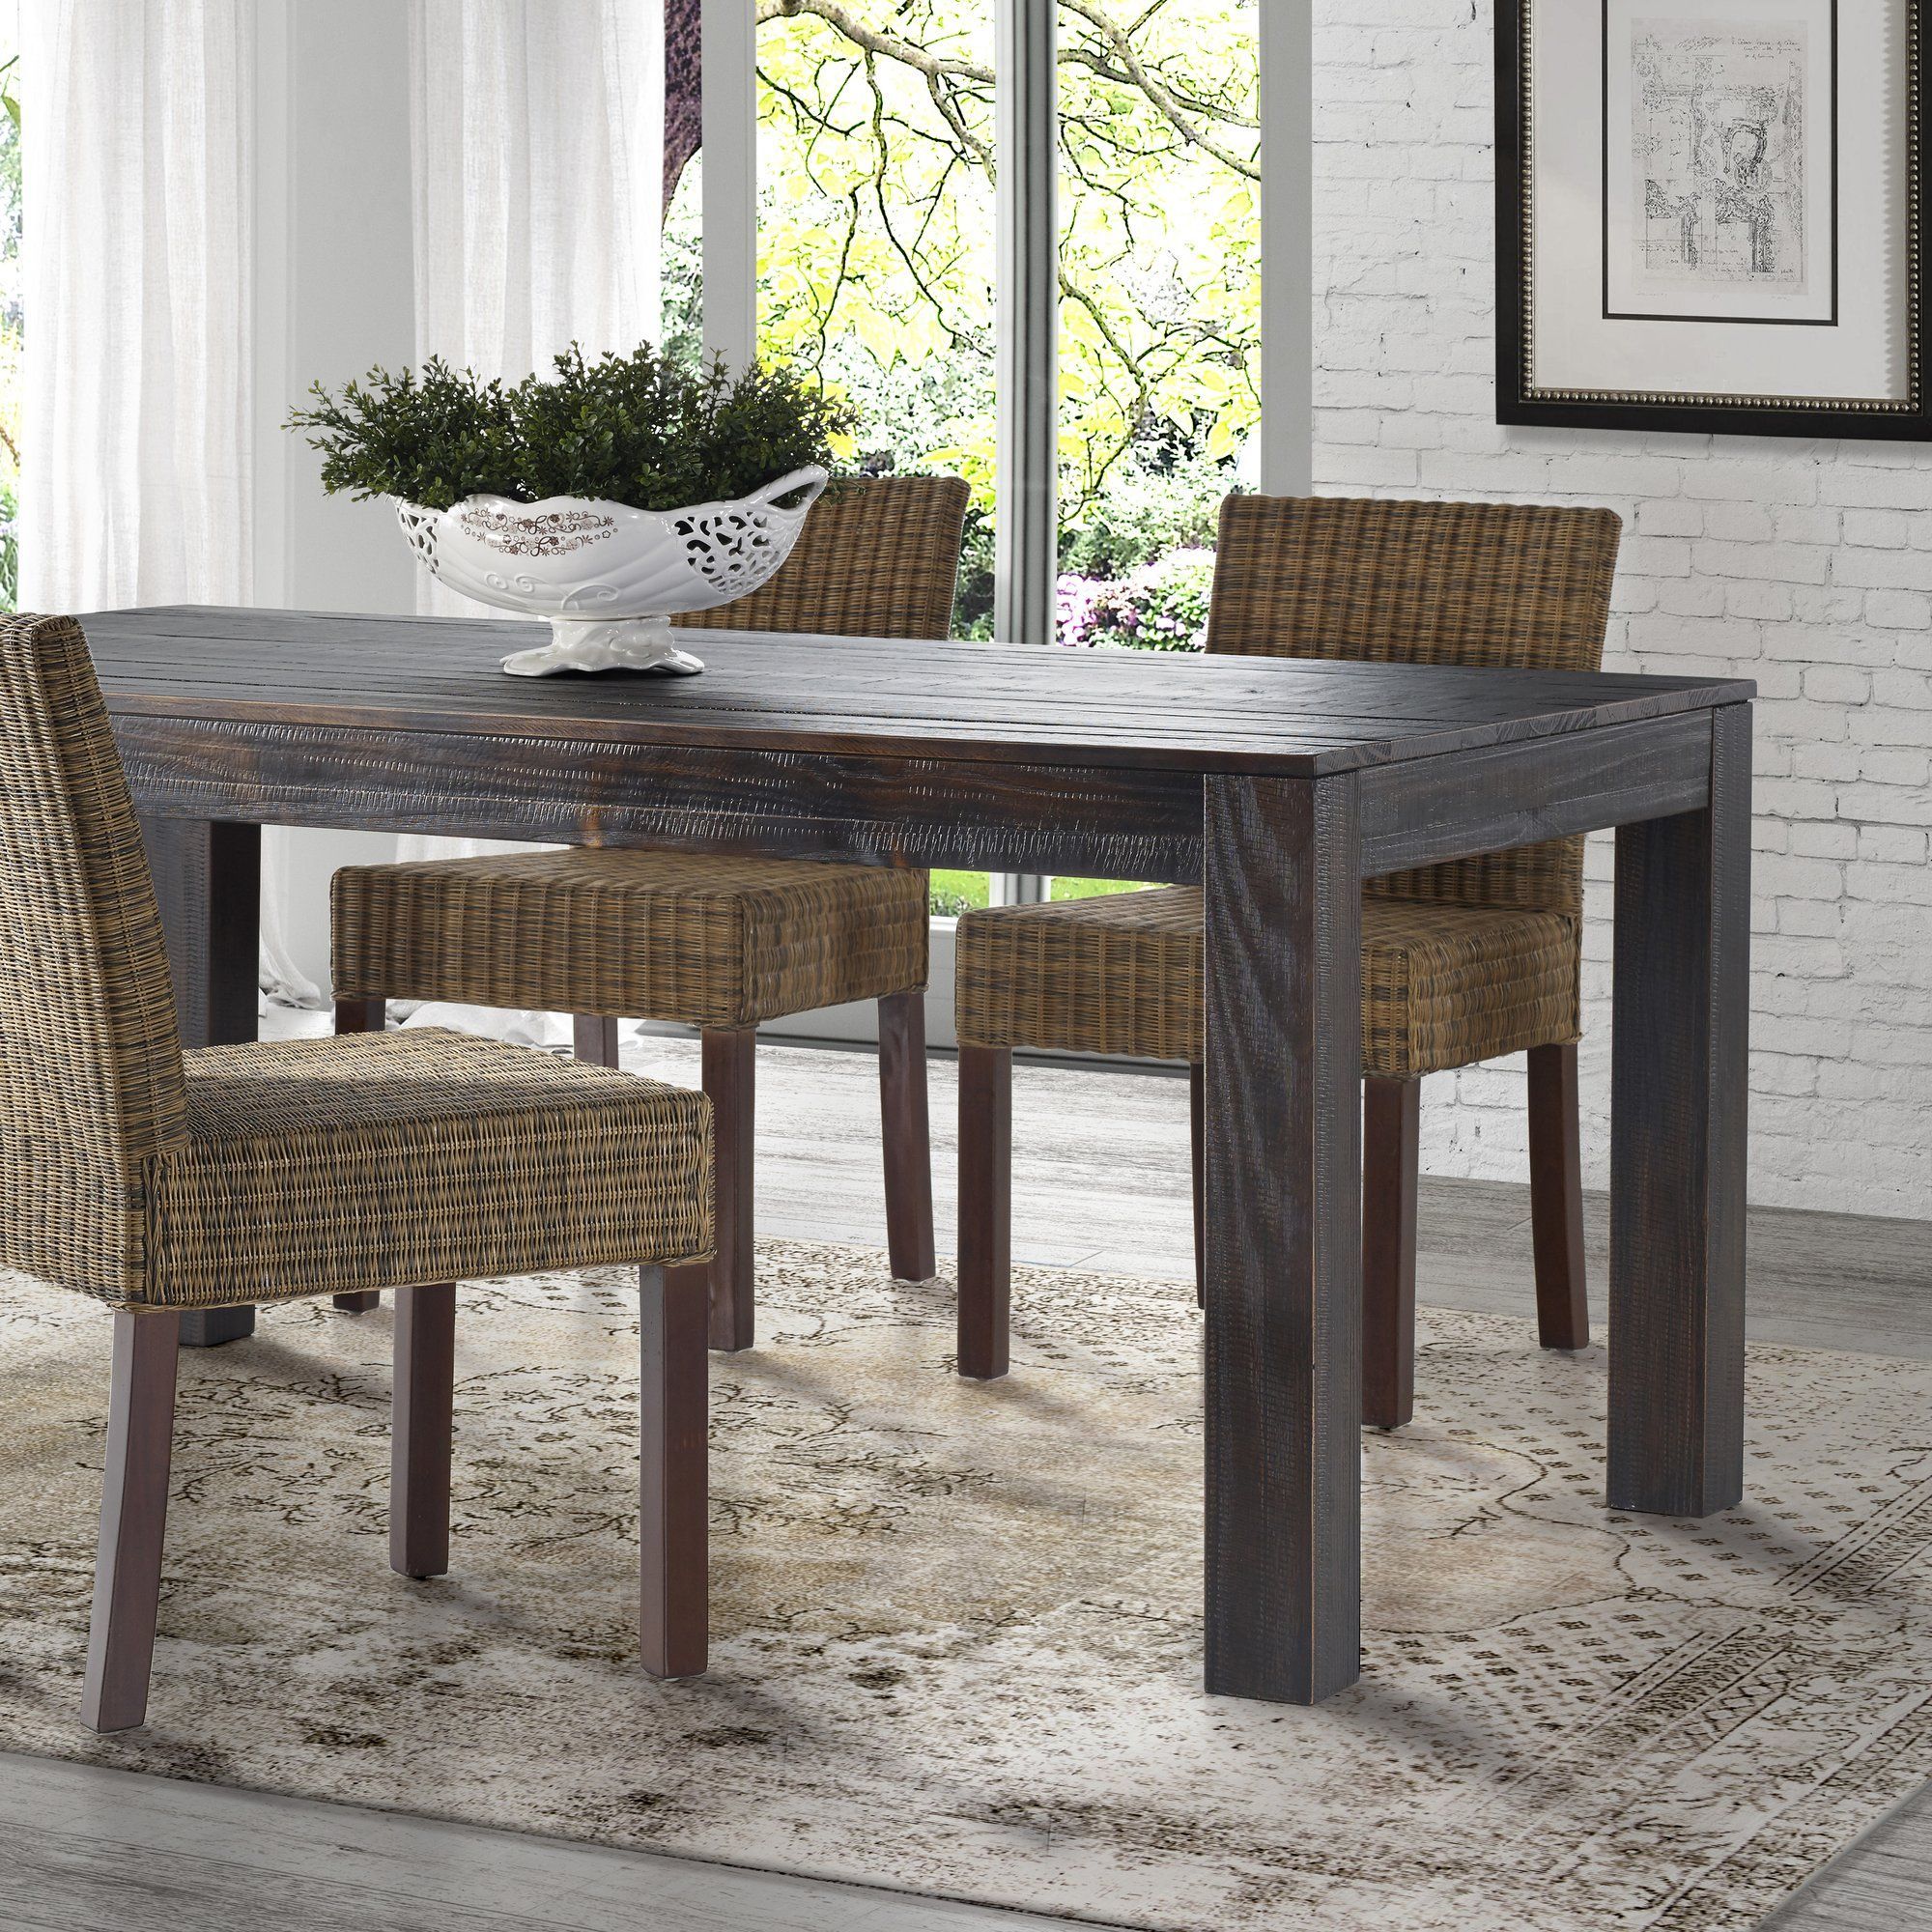 Montauk Solid Wood Pine Dining Table | Solid Wood Dining With 2018 Bradly Extendable Solid Wood Dining Tables (View 13 of 15)